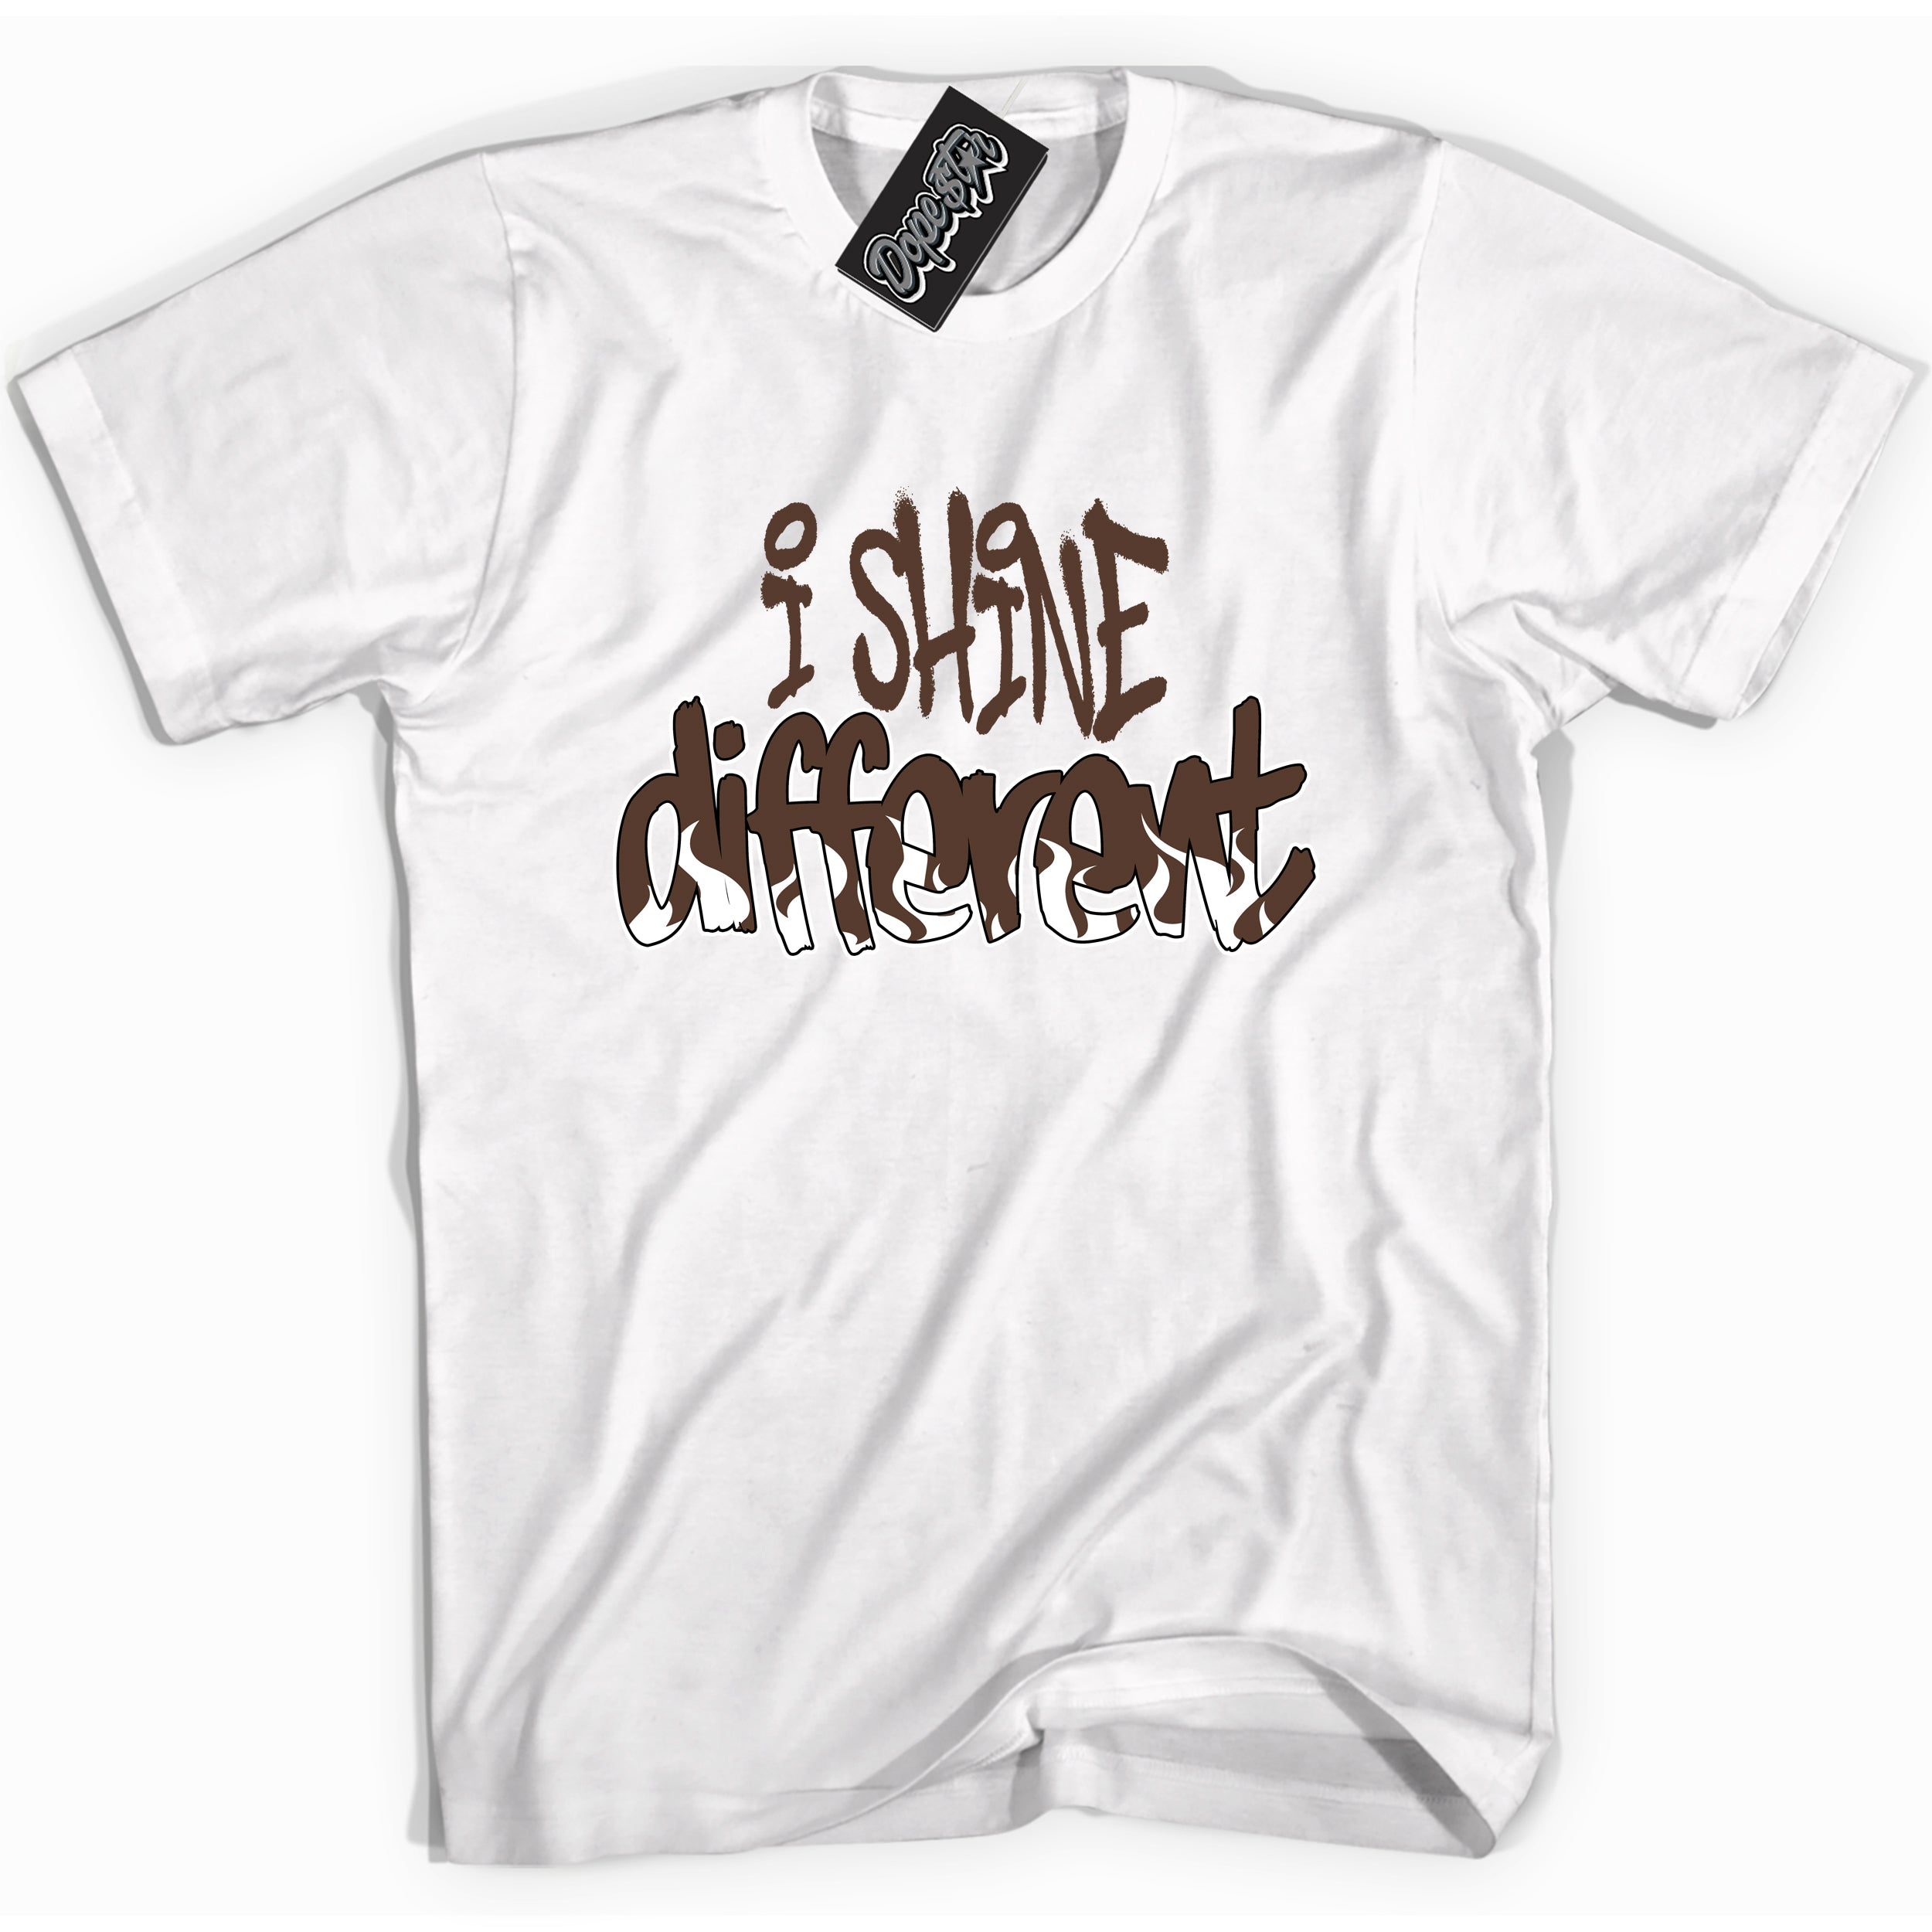 Cool White graphic tee with “ I Shine Different ” design, that perfectly matches Palomino 1s sneakers 